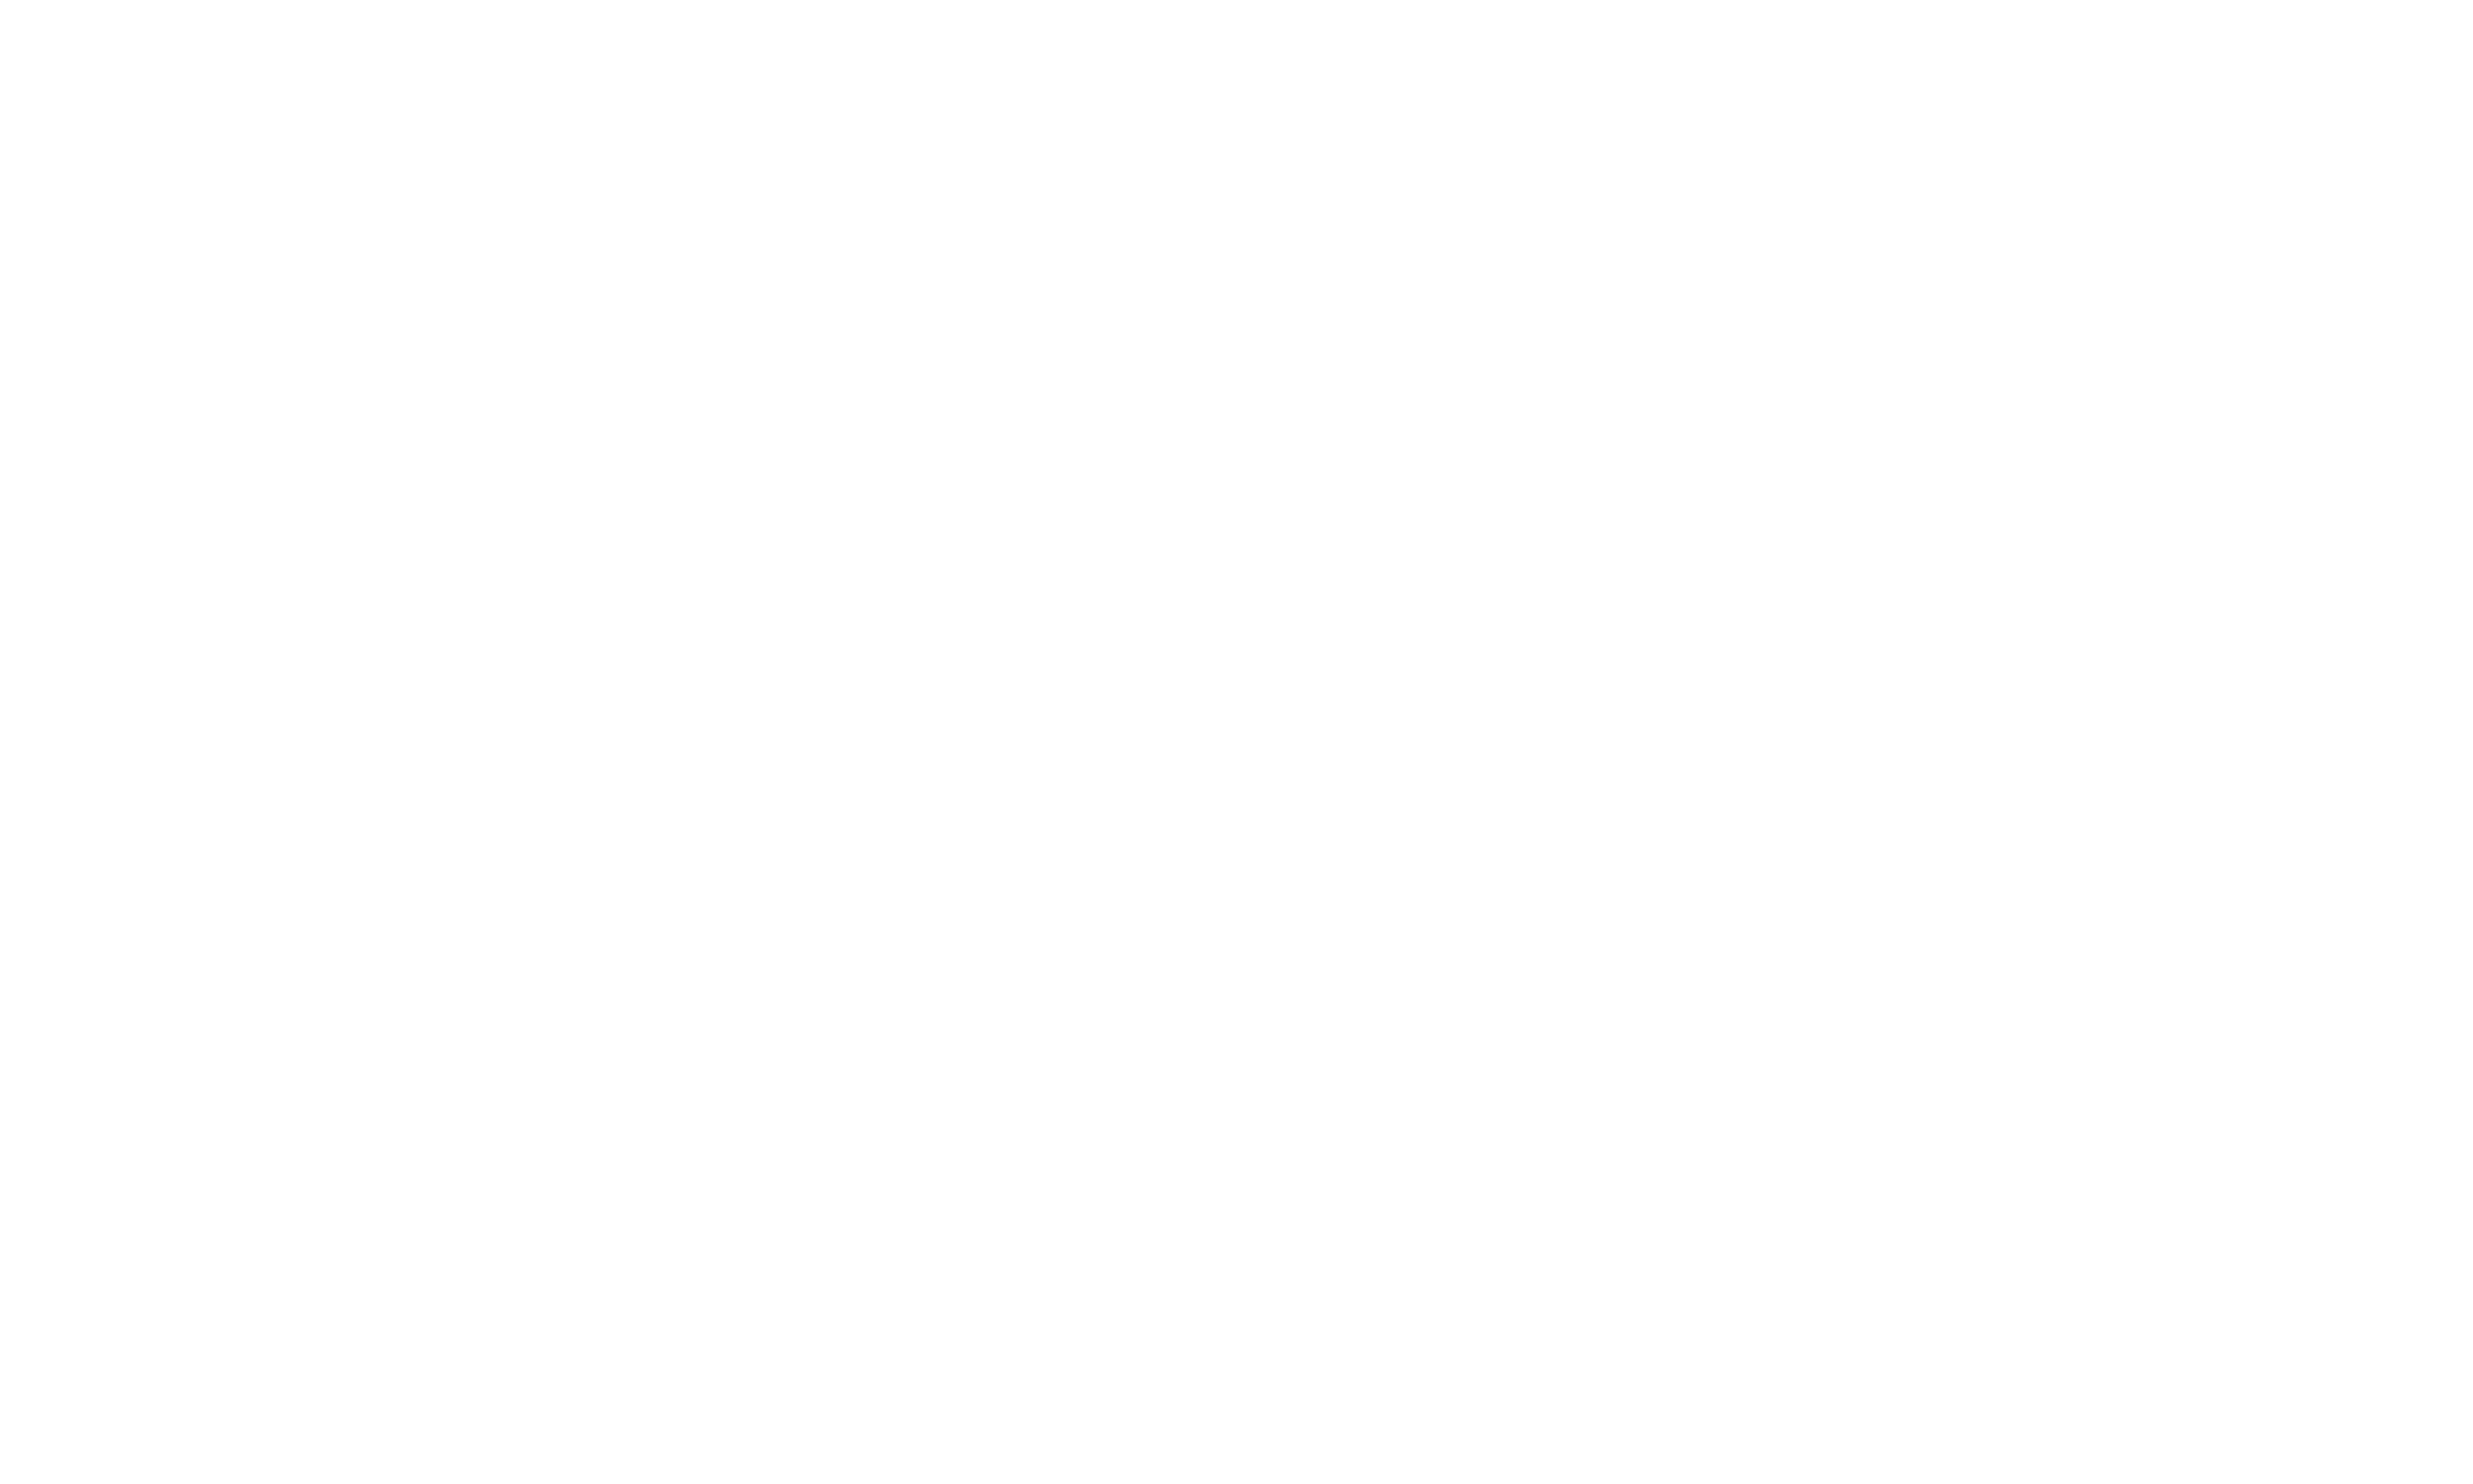 Inception Agency